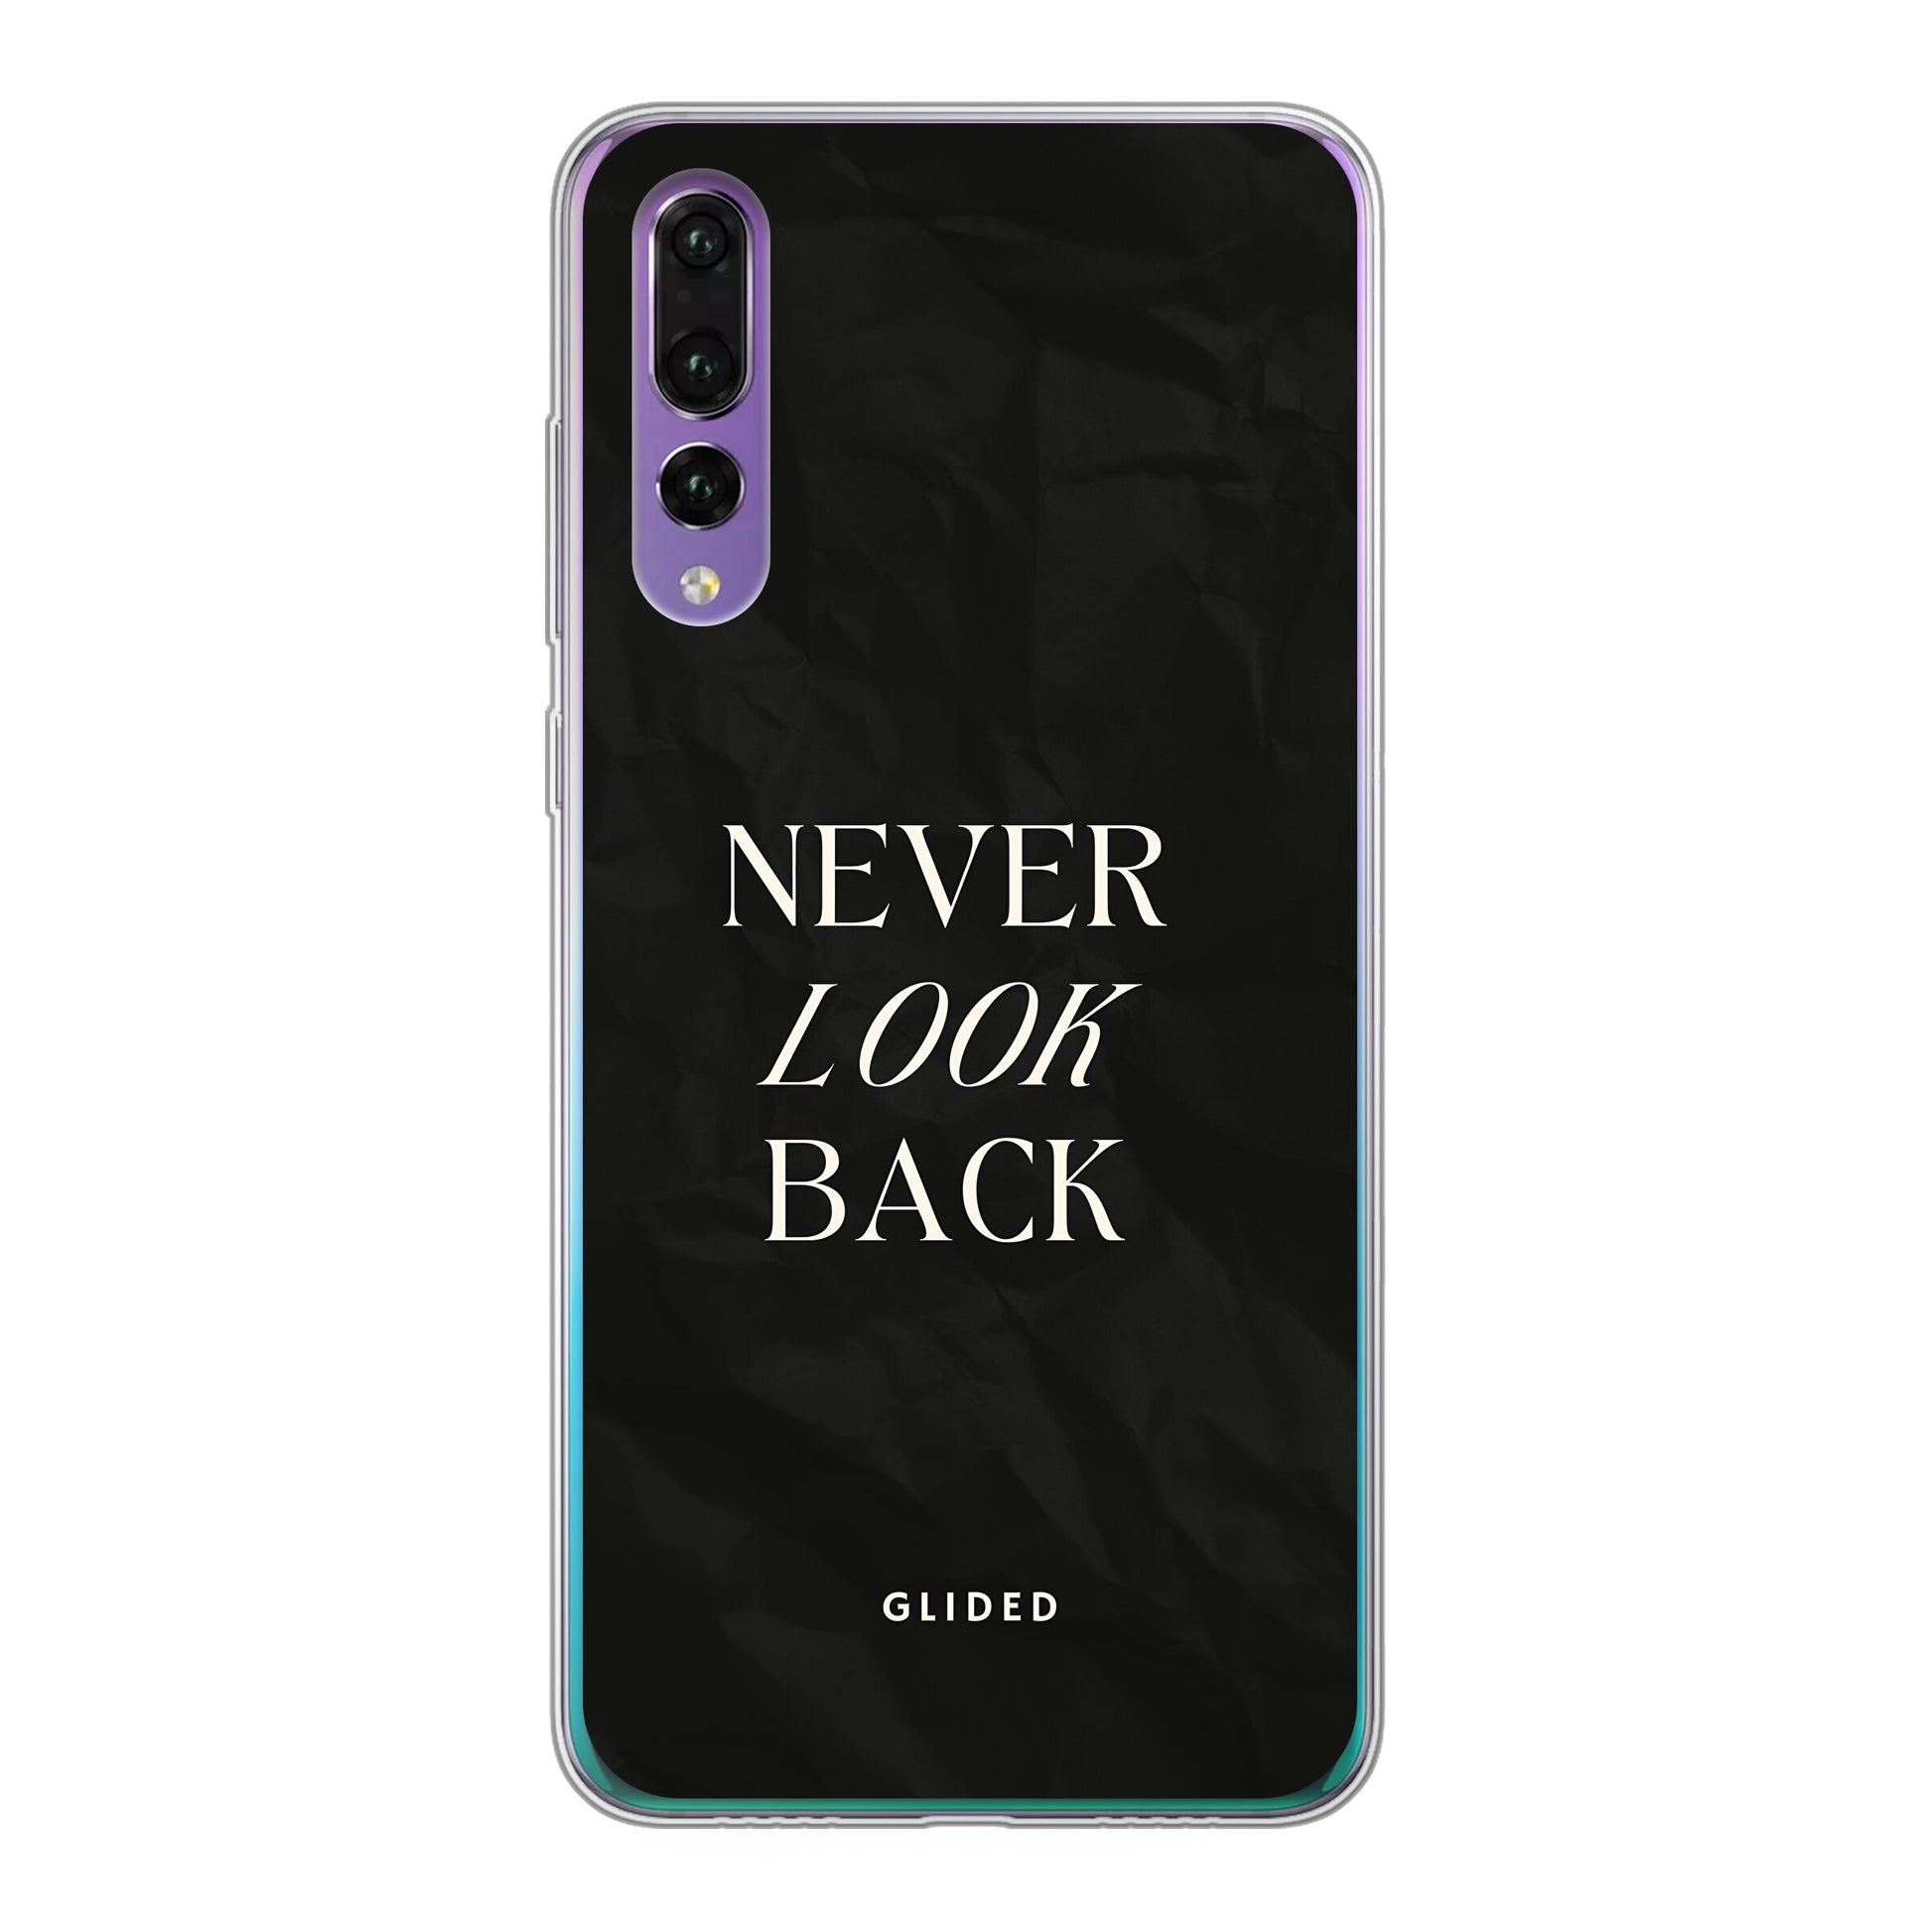 Never Back - Huawei P30 Handyhülle Soft case